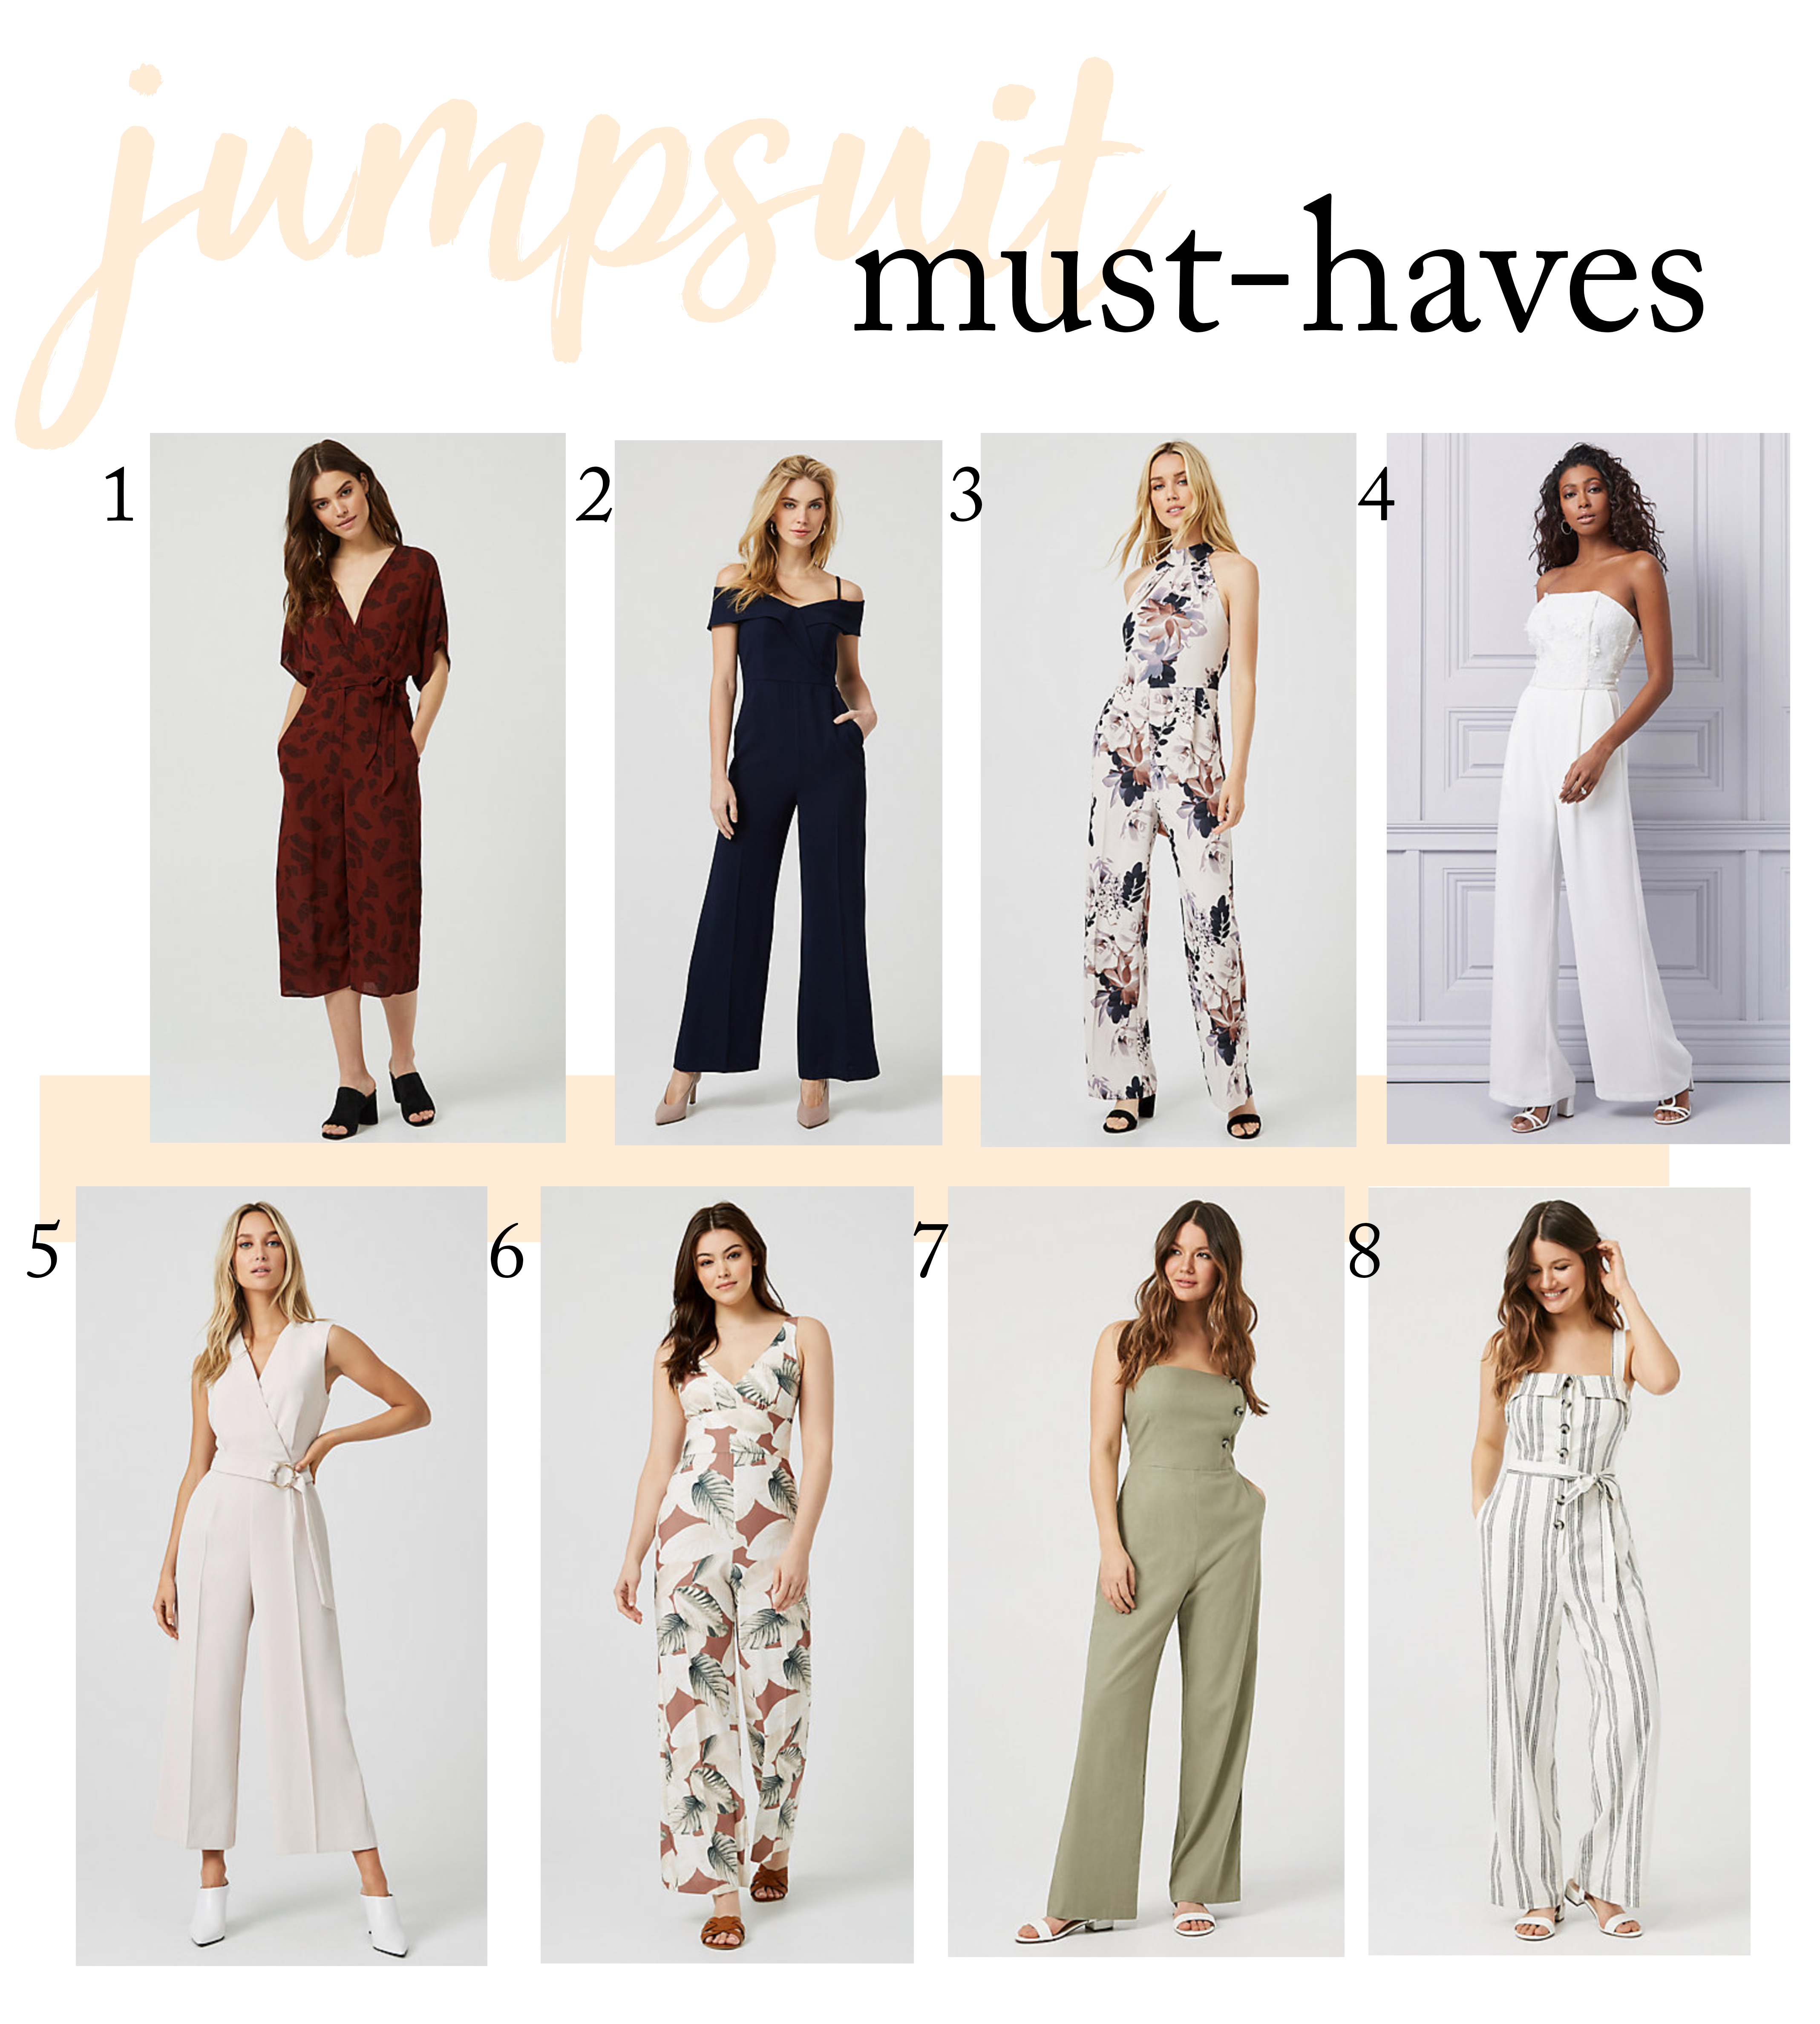 Jumpsuits Forever: 8 Must-Have Jumsuits